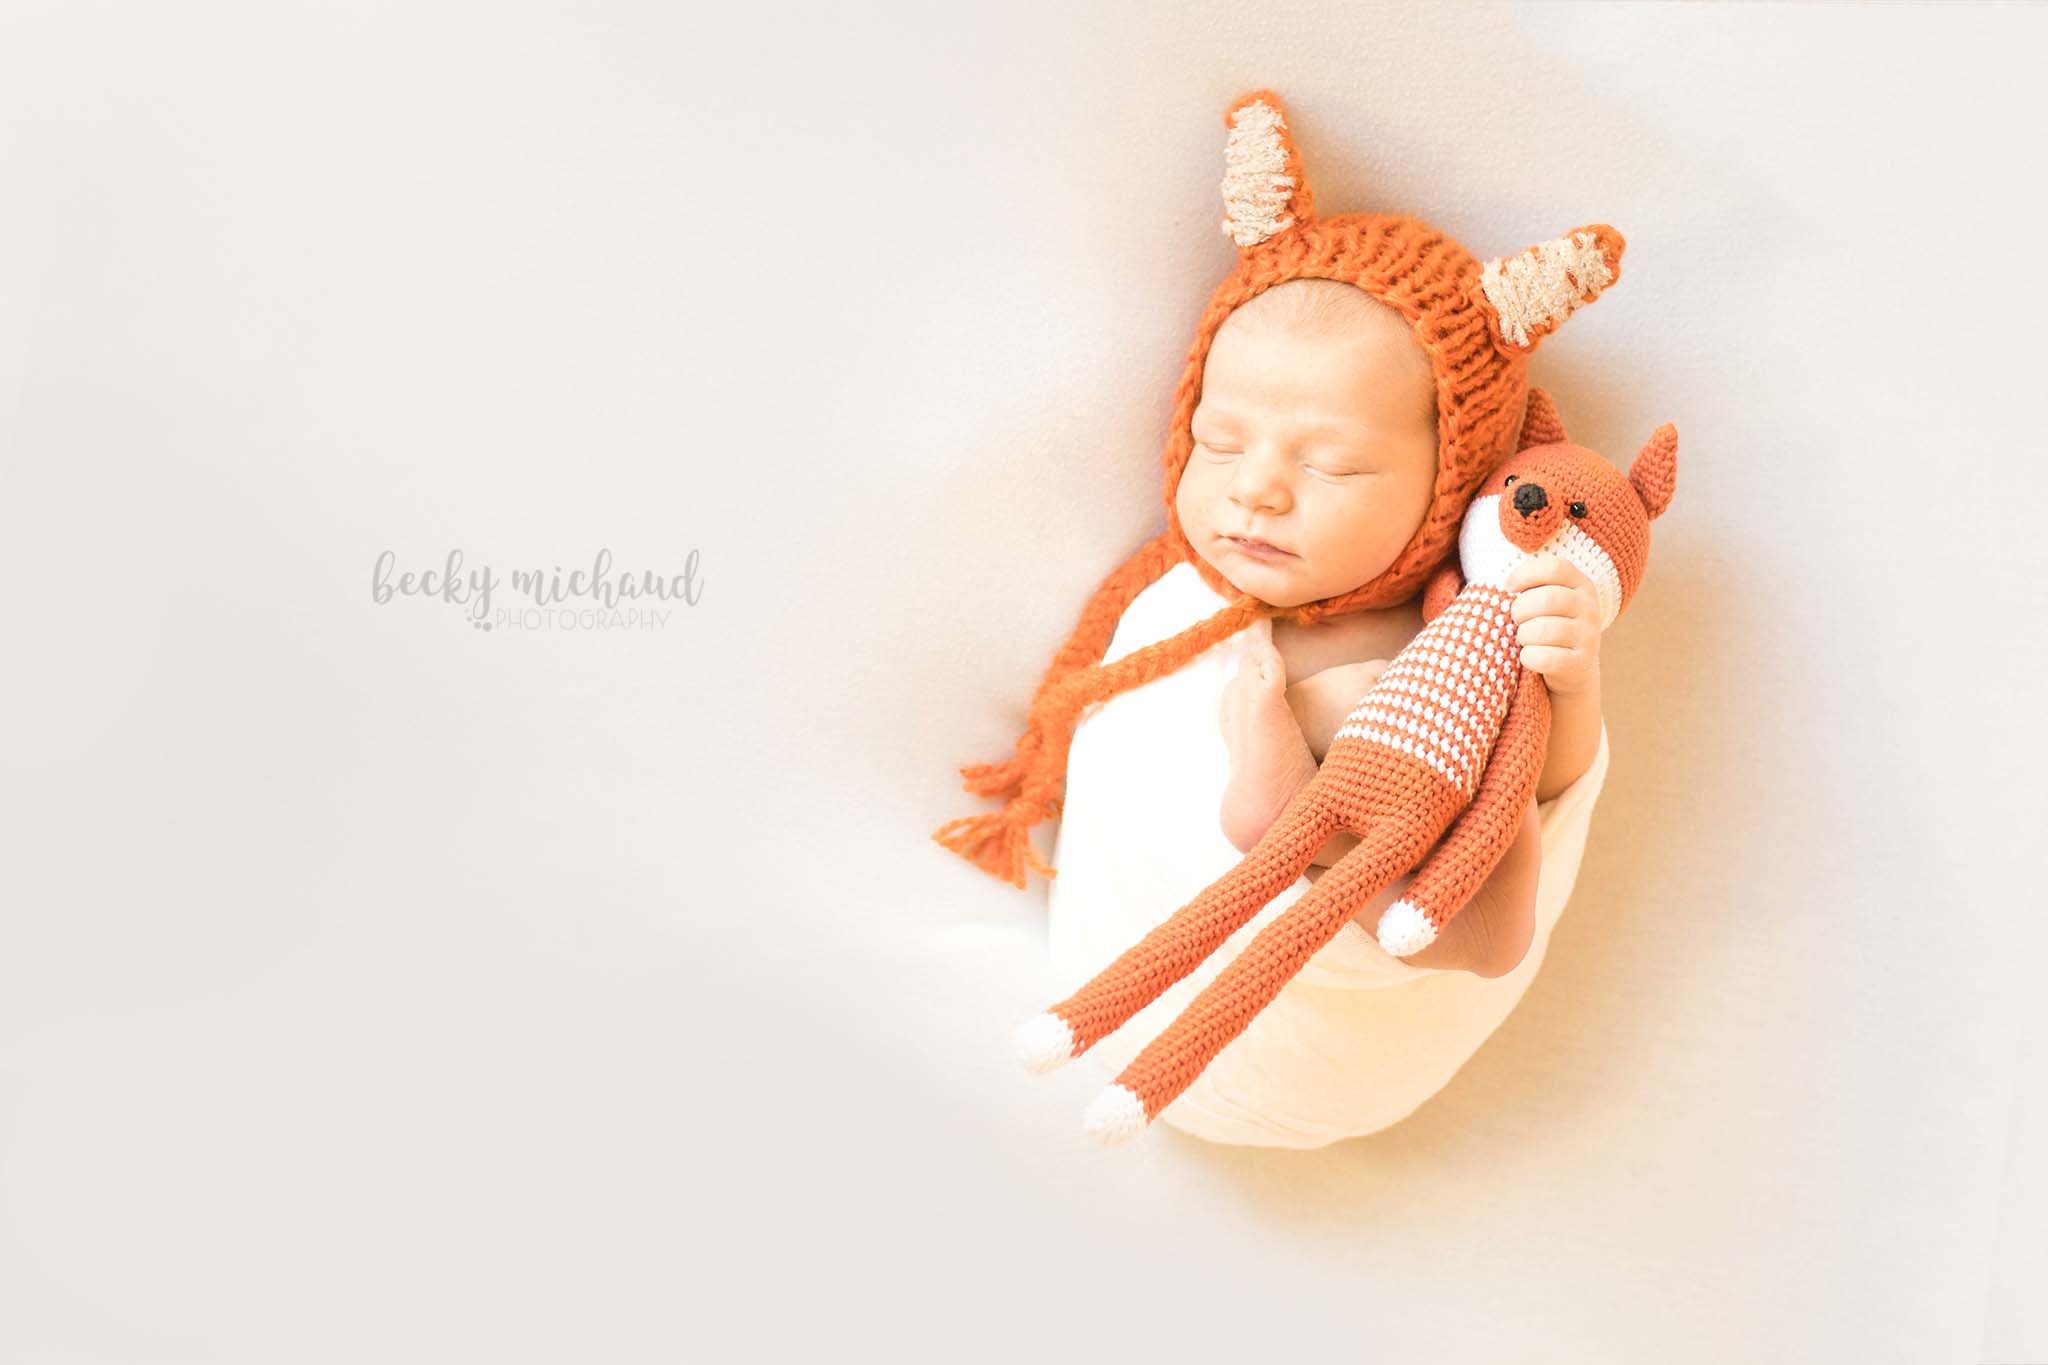 Newborn photo by Becky Michaud, Northern Colorado photographer, of a baby wearing a fox bonnet and holding a fox toy